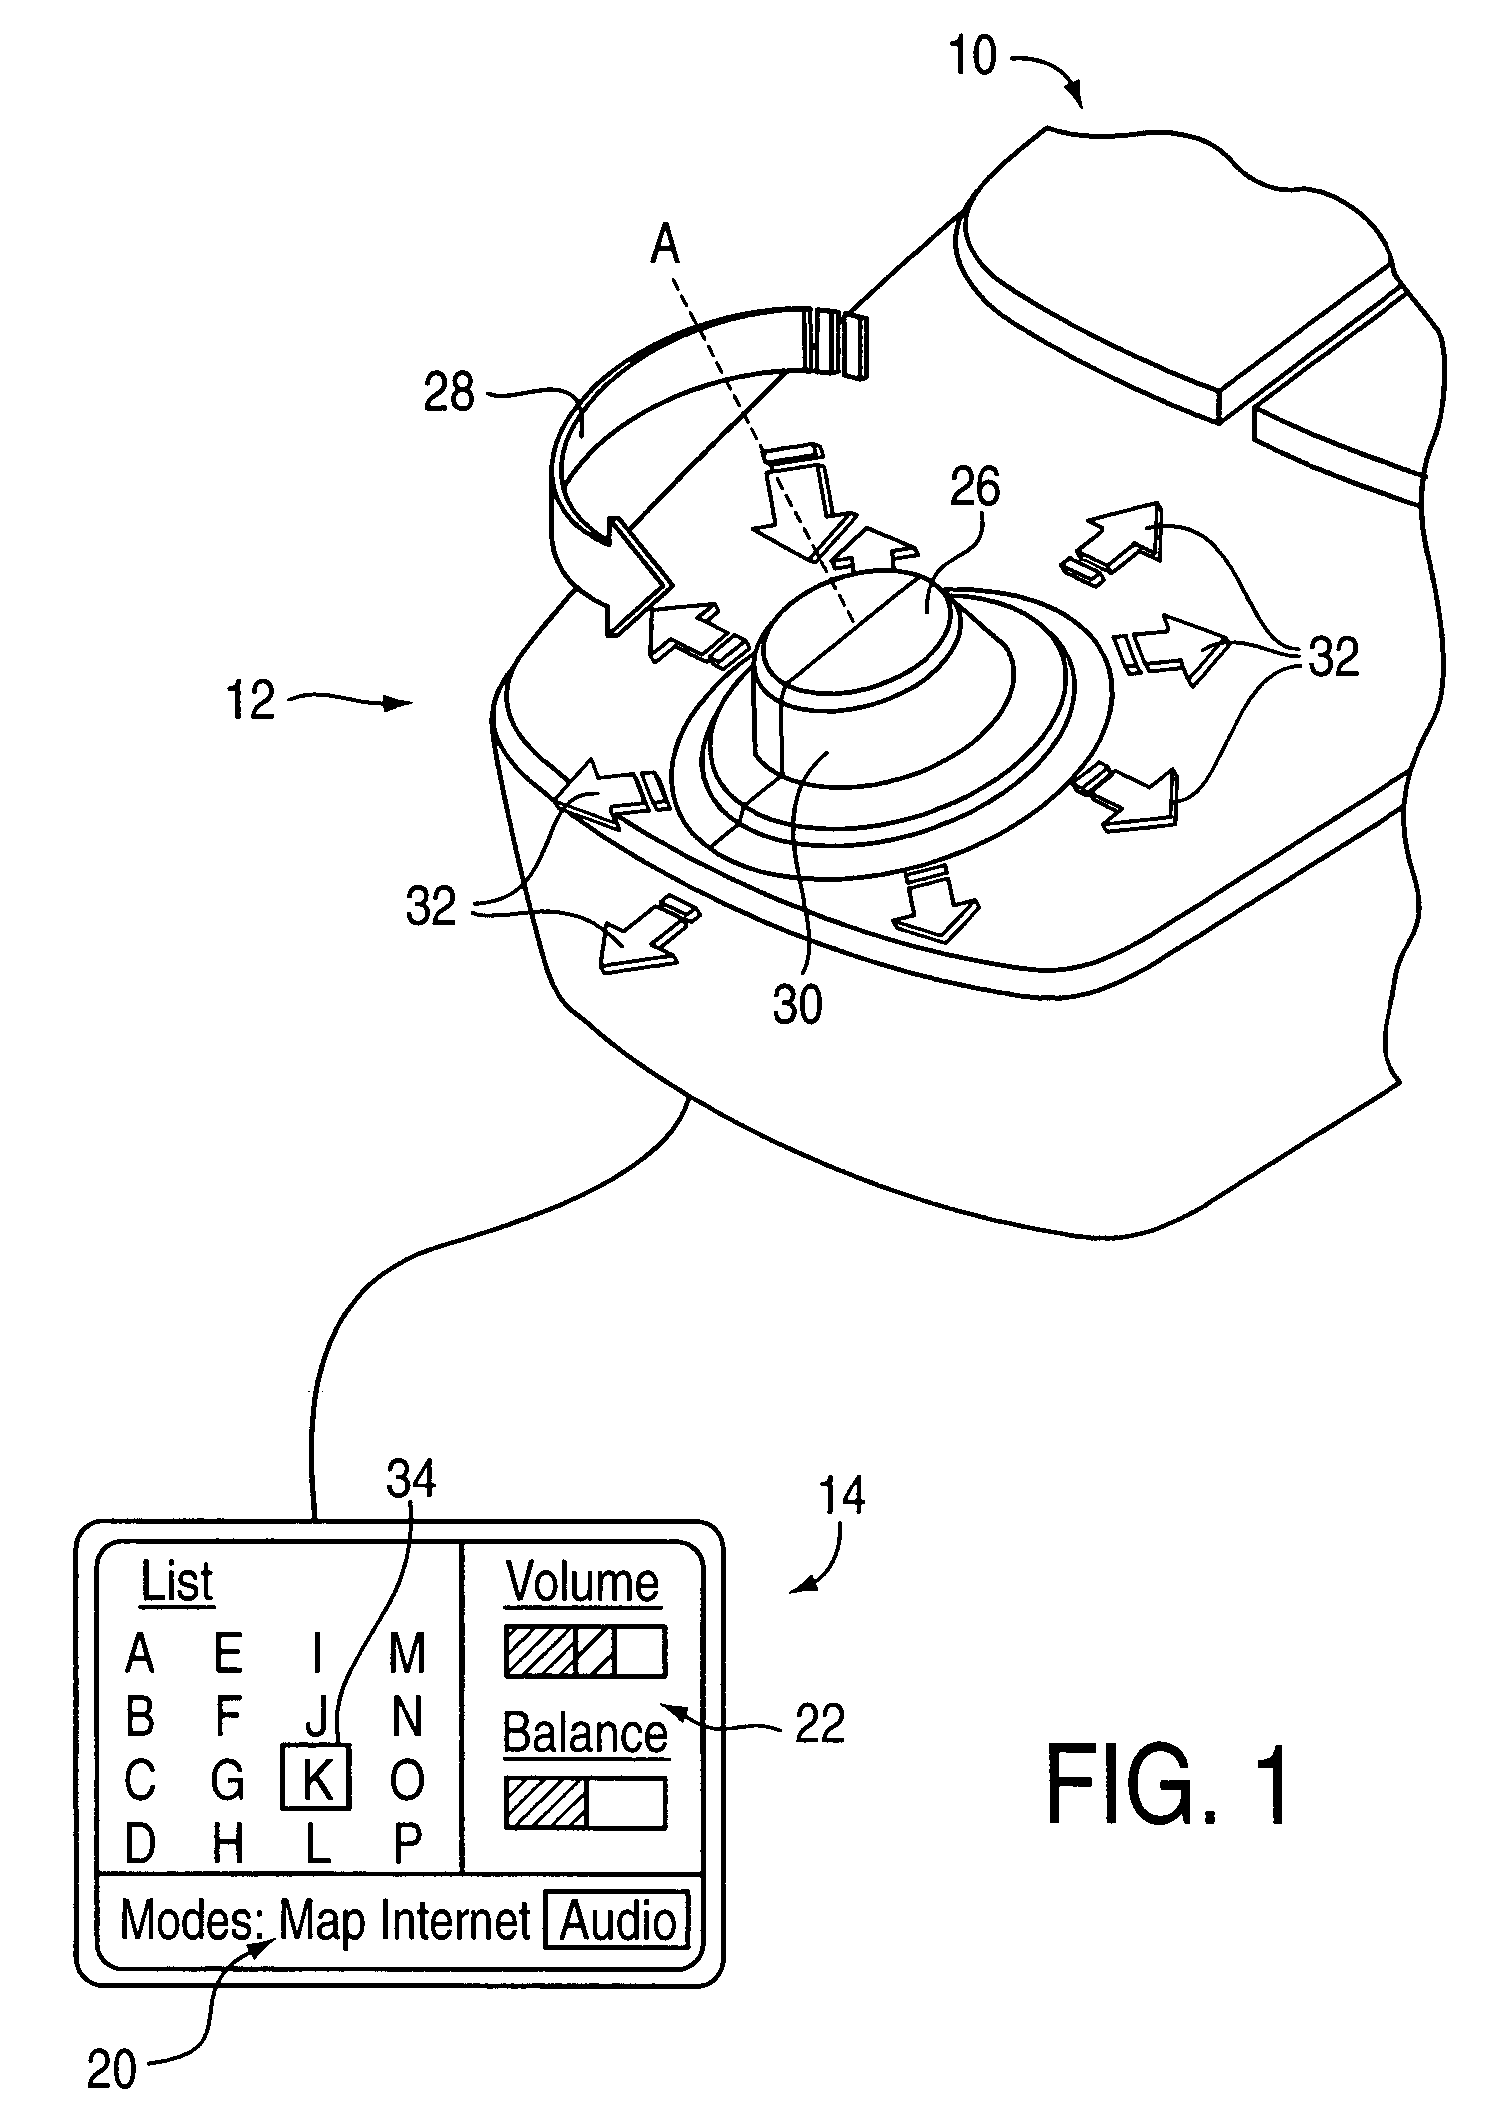 Haptic feedback effects for control knobs and other interface devices